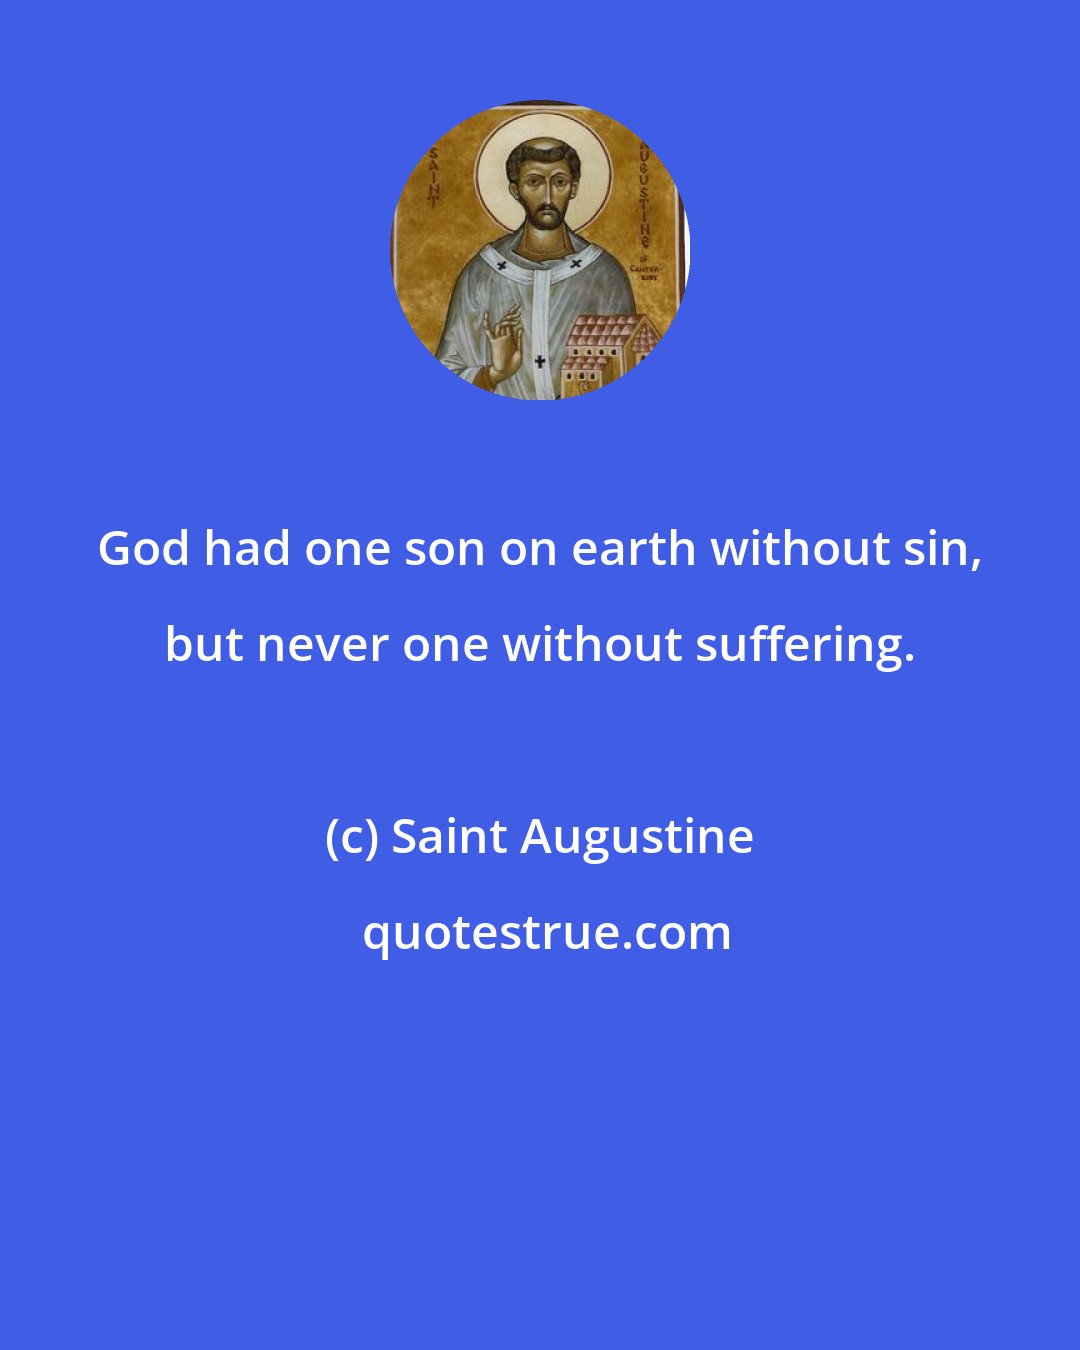 Saint Augustine: God had one son on earth without sin, but never one without suffering.